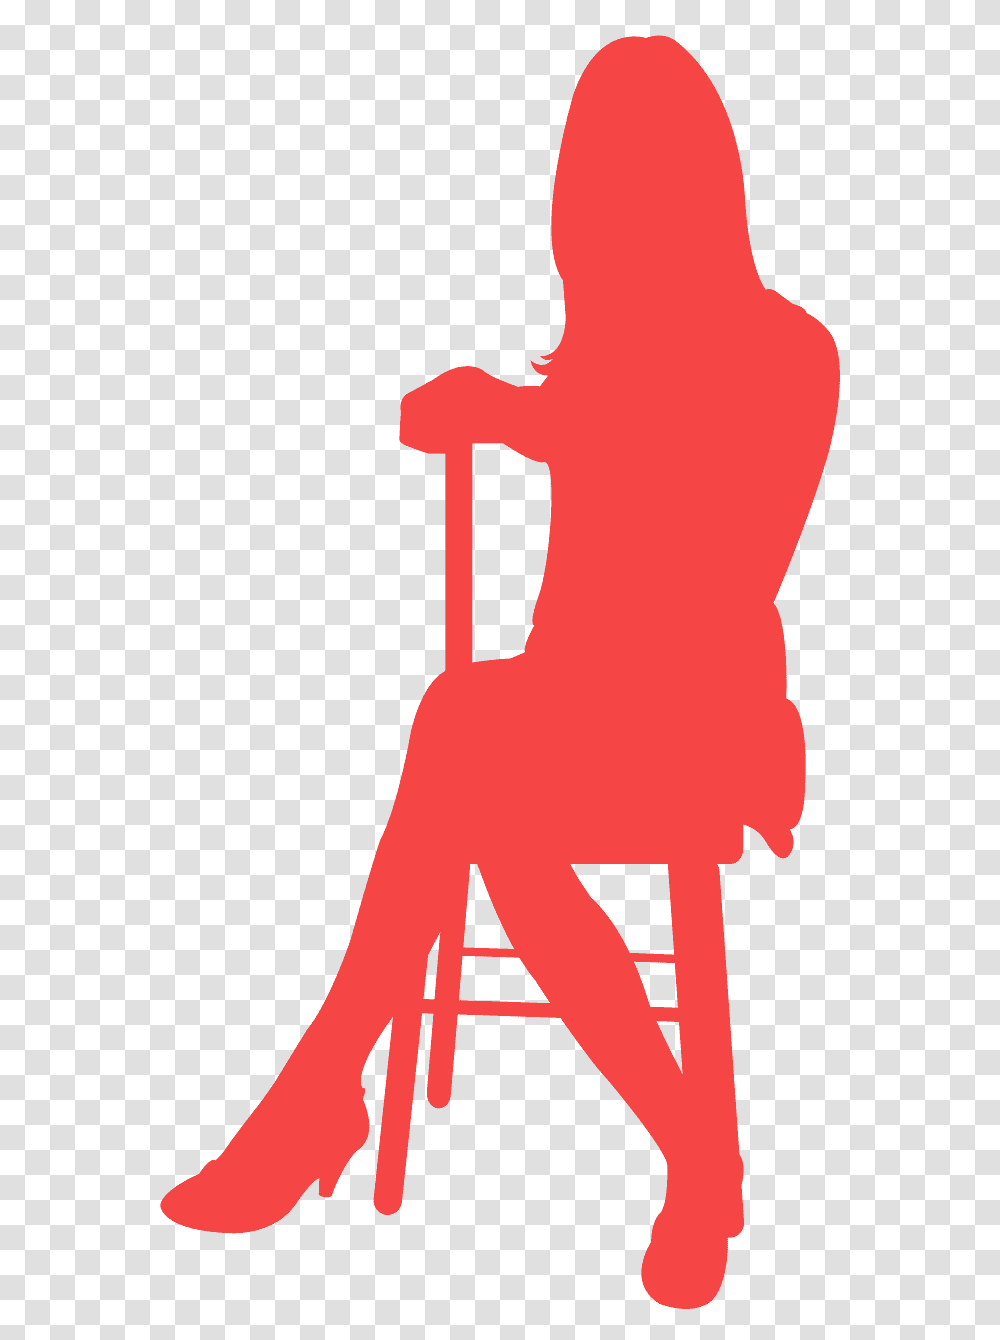 Sitting Cross Legged Woman Chair, Silhouette Transparent Png